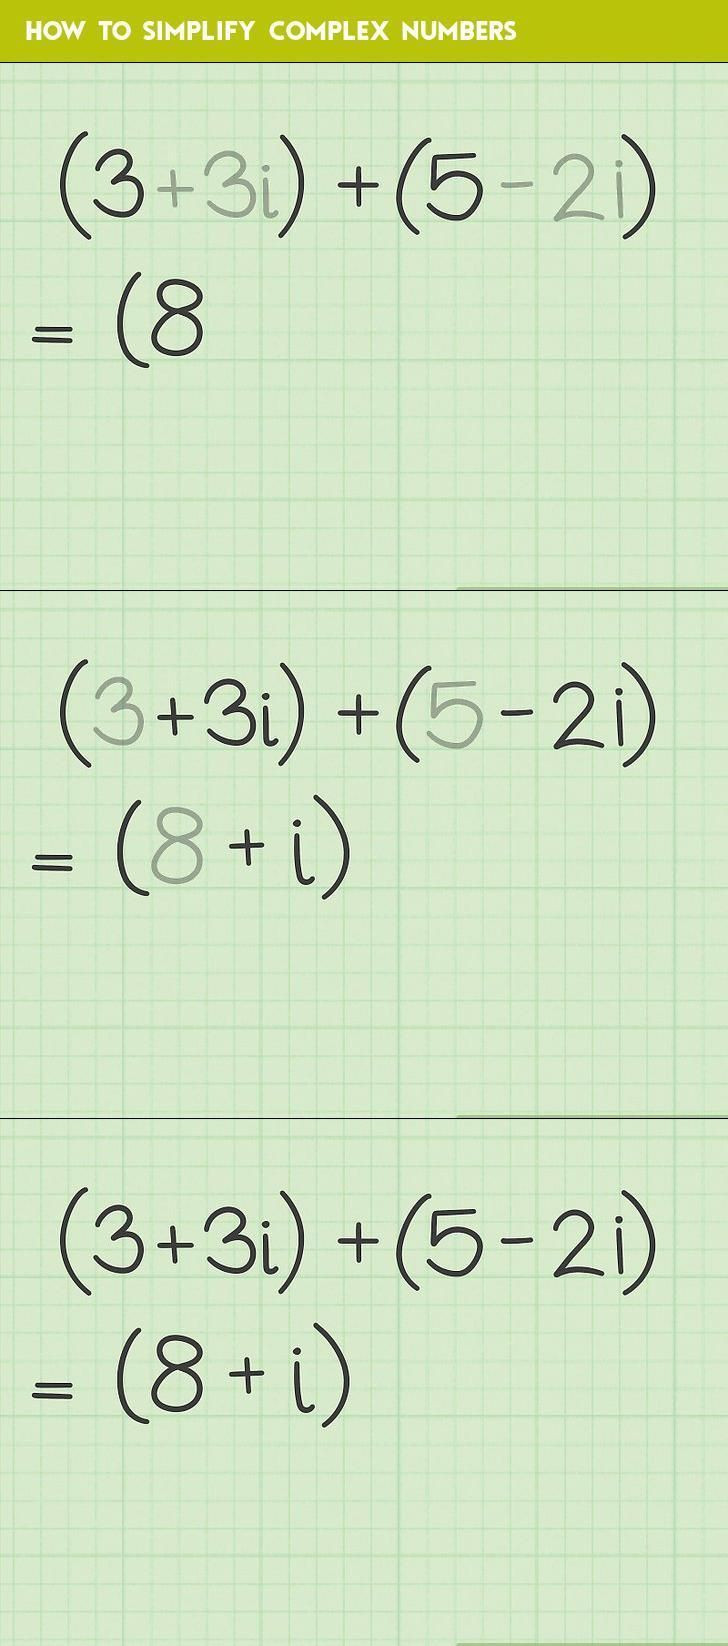 Simplifying Complex Numbers Worksheet How to Simplify Plex Numbers You Wanna Know How